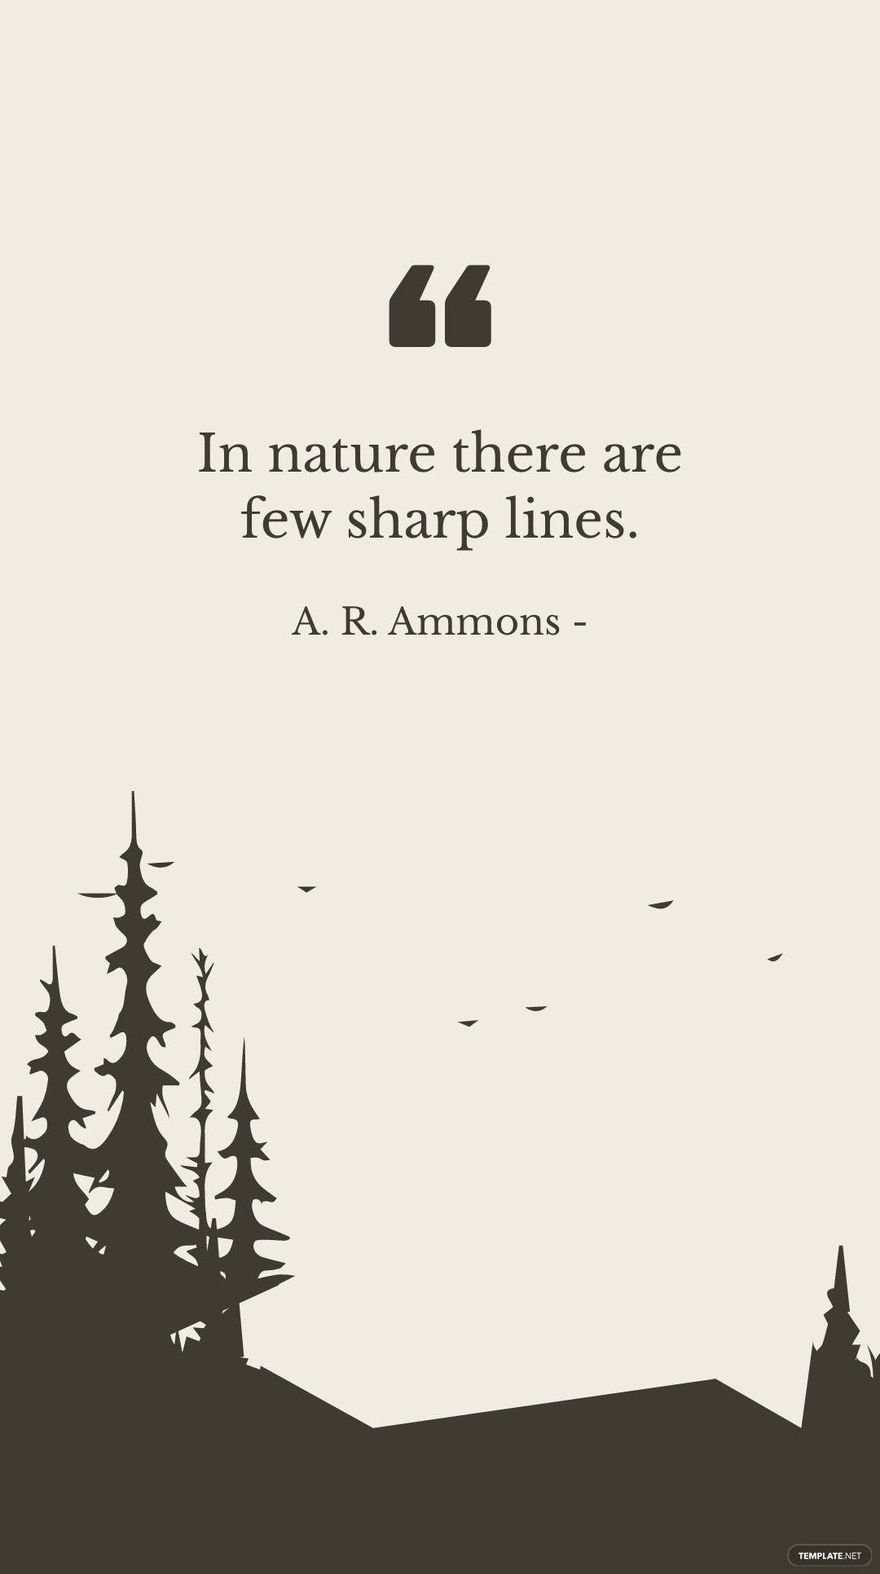 Free A. R. Ammons - In nature there are few sharp lines. in JPG